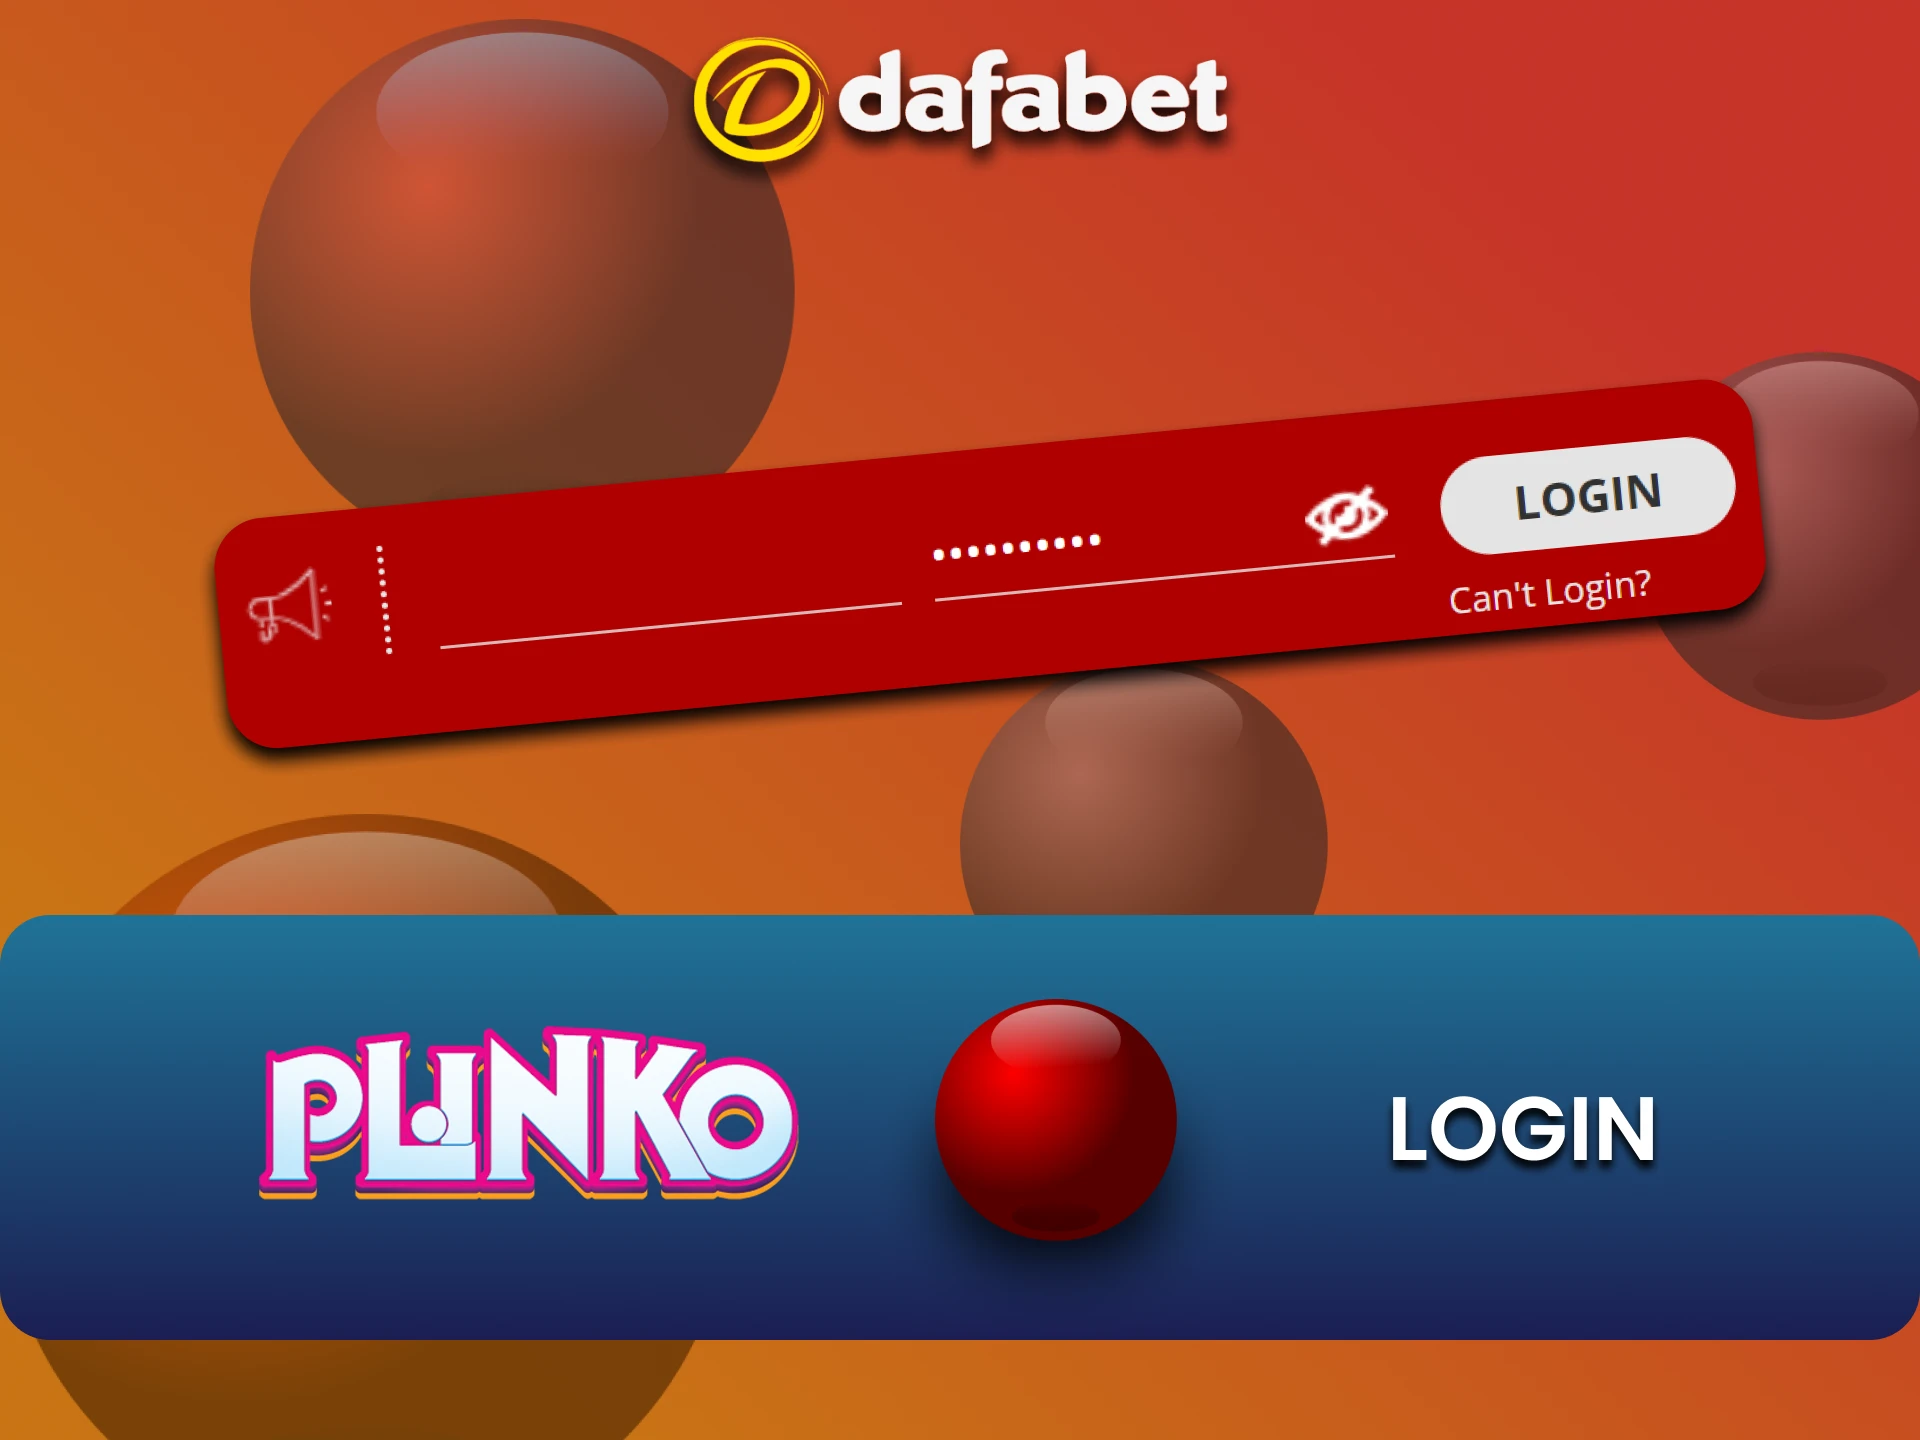 Log in to your Dafabet account and play Plinko.